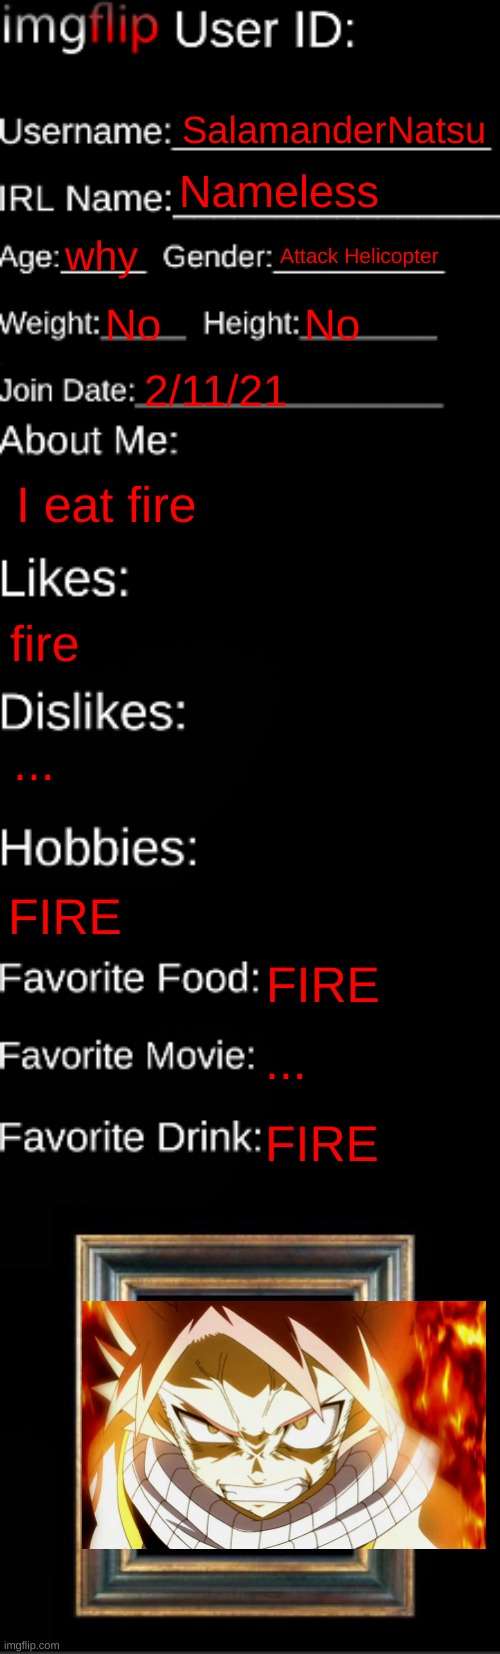 imgflip ID Card | SalamanderNatsu; Nameless; why; Attack Helicopter; No; No; 2/11/21; I eat fire; fire; ... FIRE; FIRE; ... FIRE | image tagged in imgflip id card | made w/ Imgflip meme maker